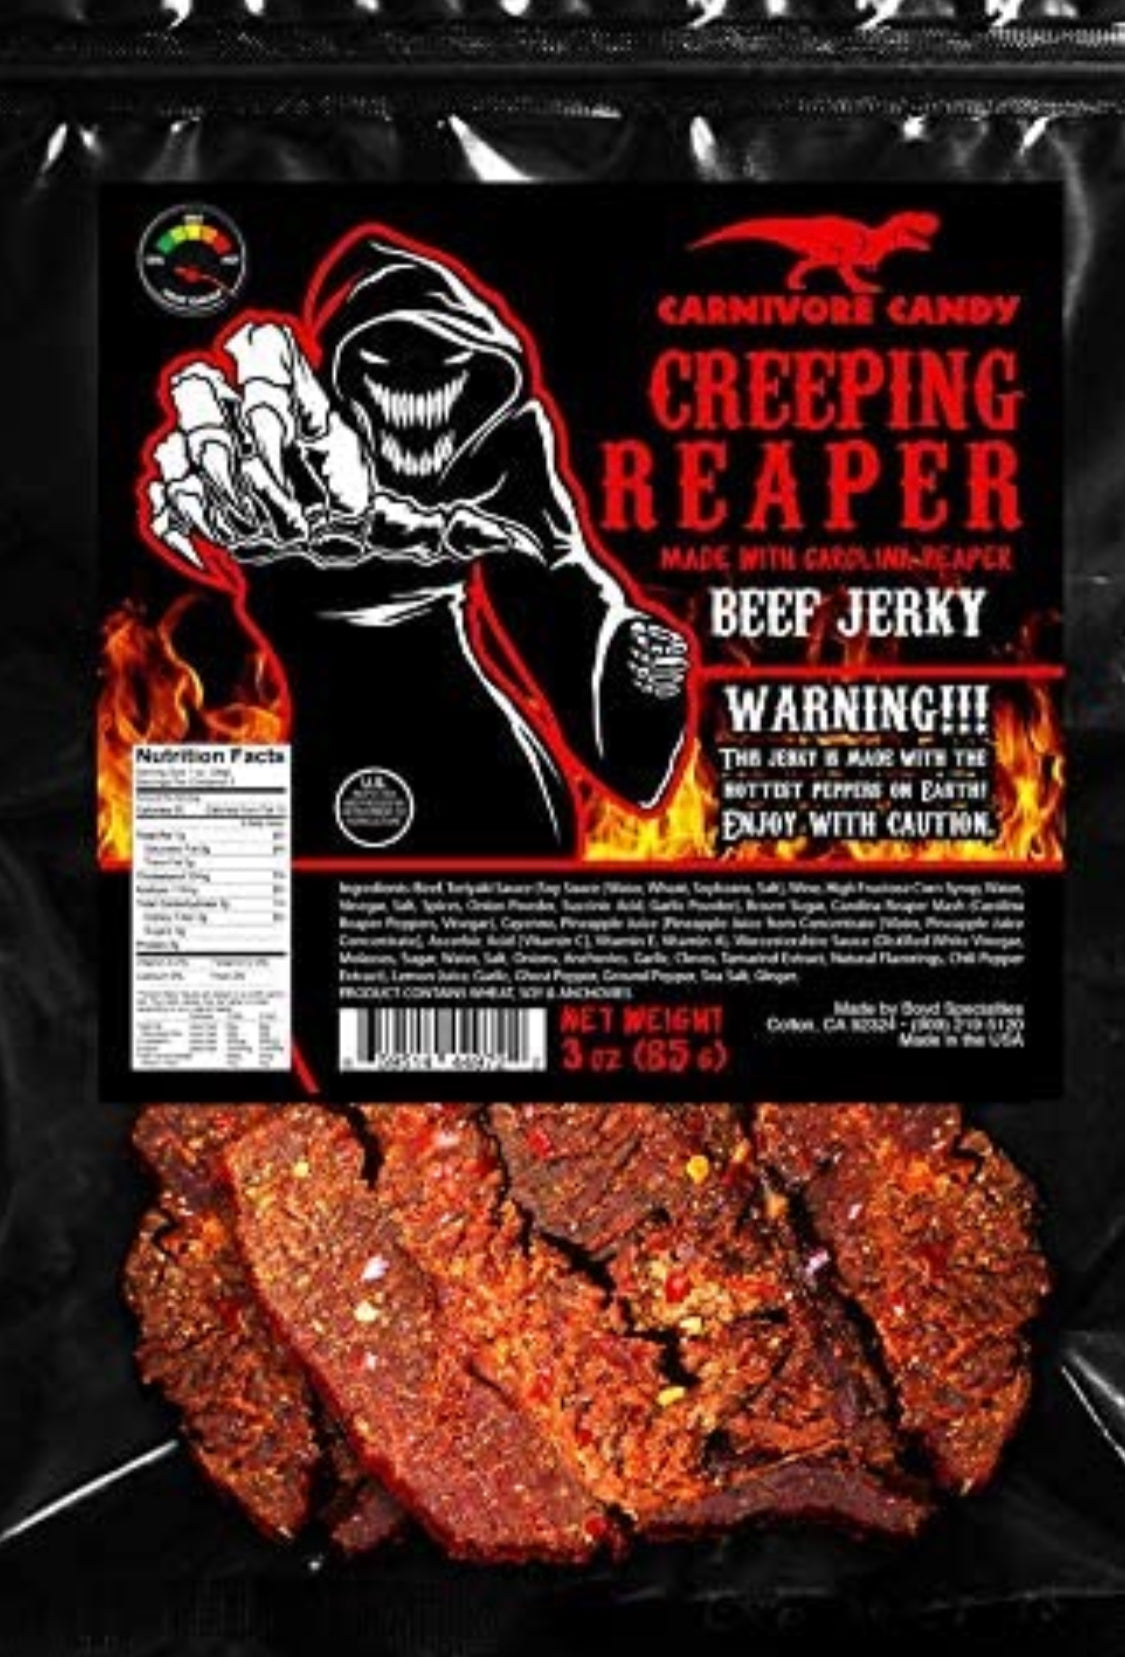 JURASSIC JERKY’S “CREEPING REAPER” Carolina Reaper Beef Jerky (1)-3oz Bag The Reaper is the HOTTEST Pepper in the world! Sweet with Heat~